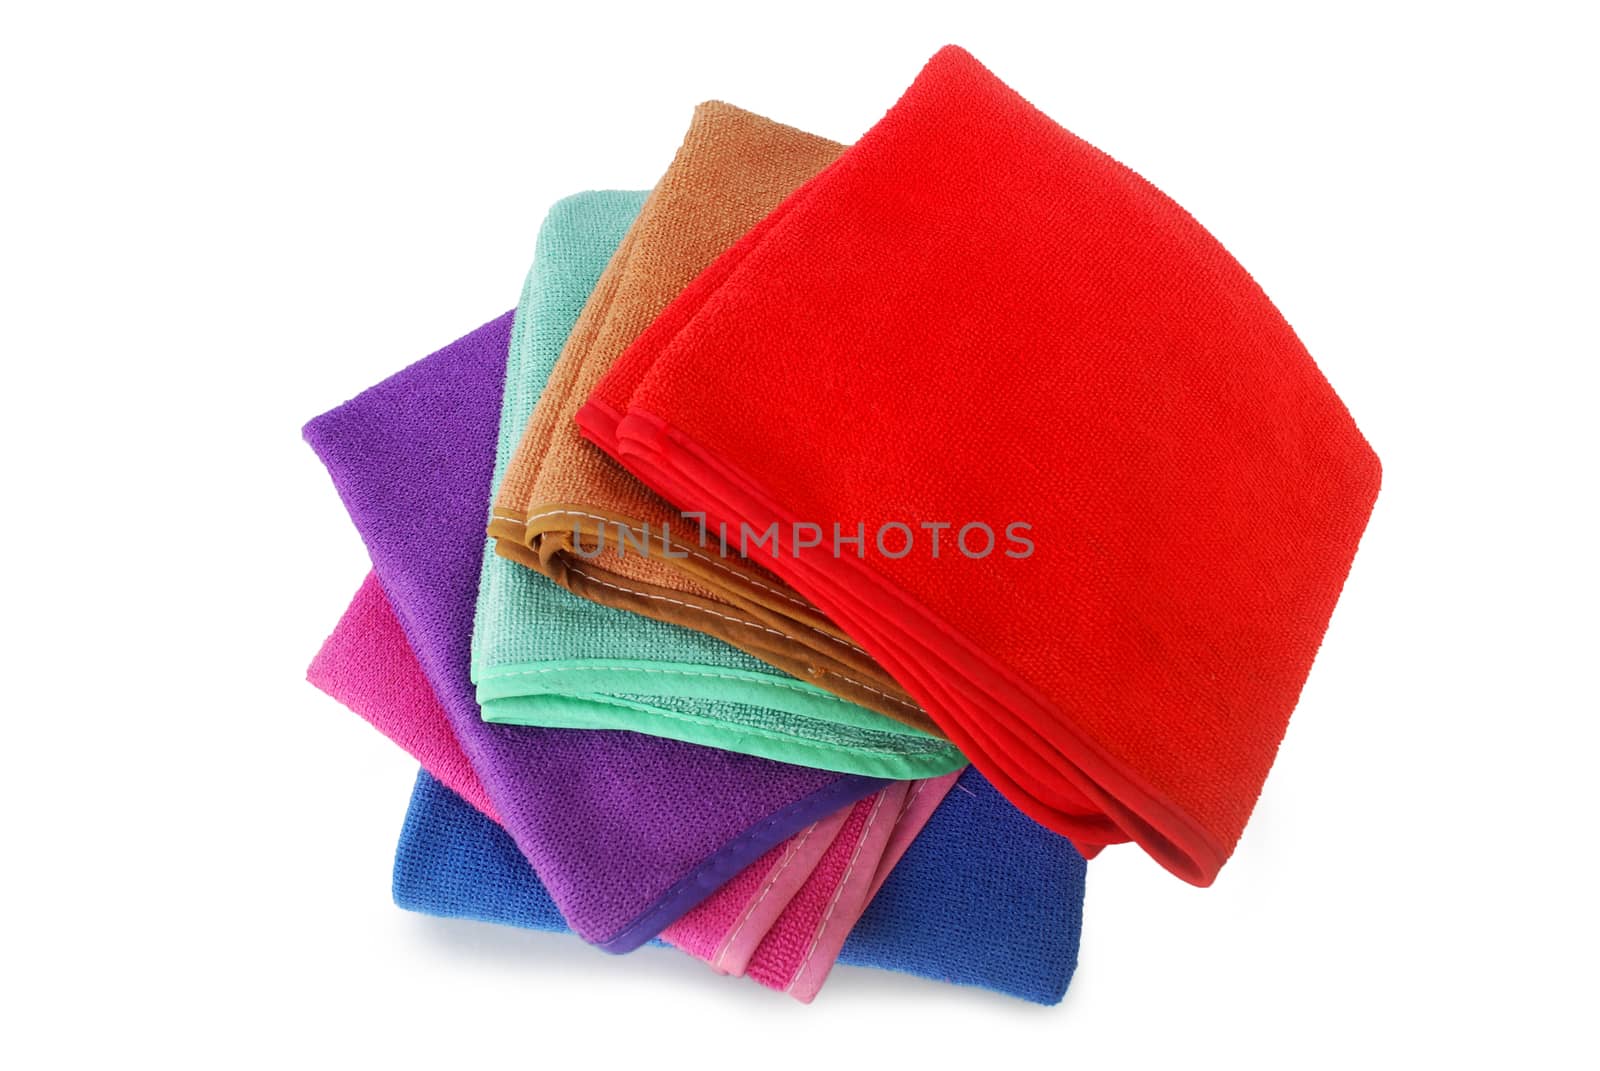 Head towel for washing hair.With Clipping Path.